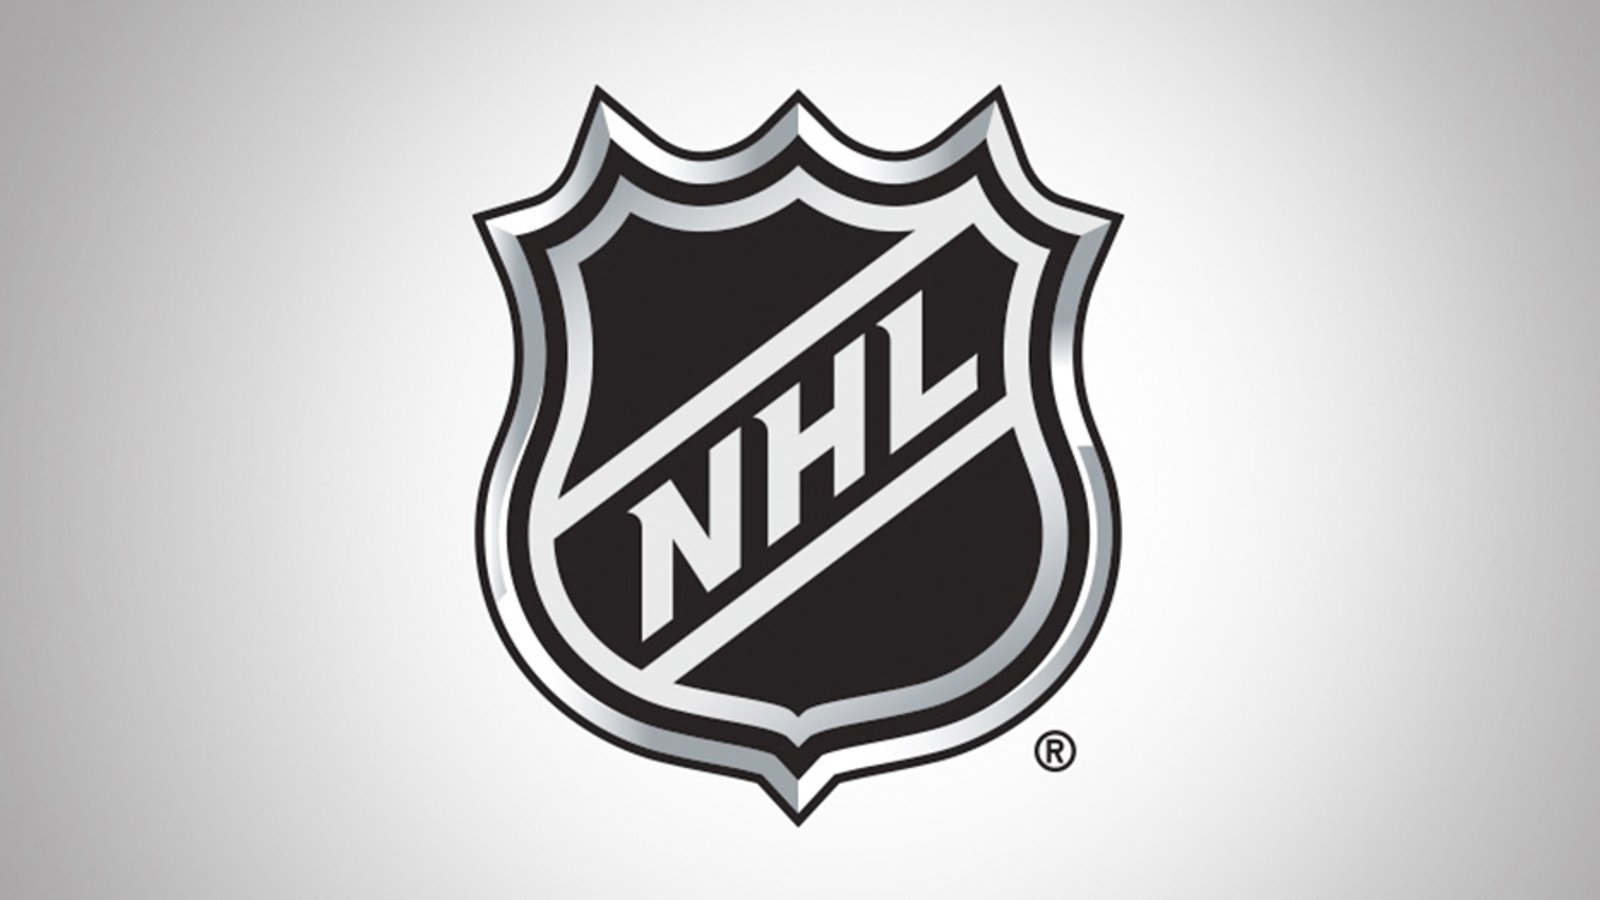 NHL presents some VERY good news after latest round of testing